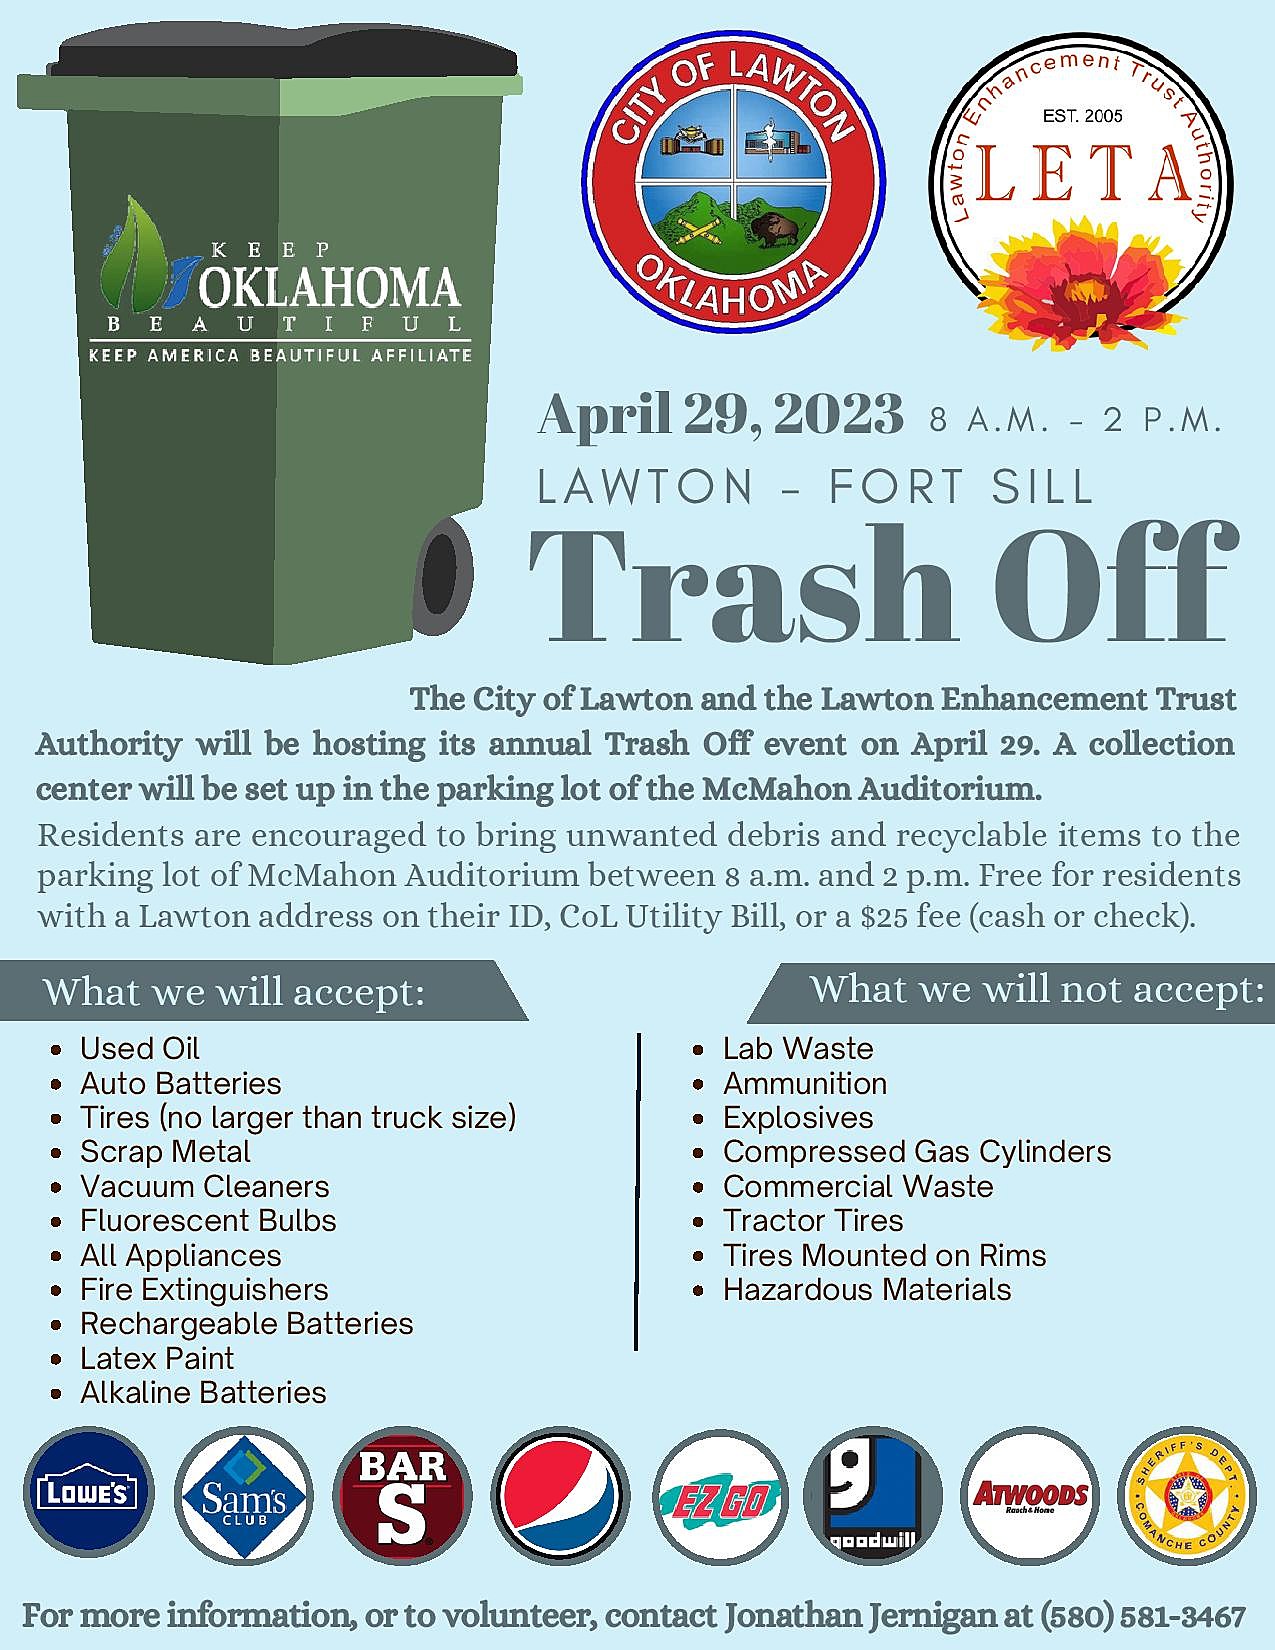 The 2023 Lawton, Fort Sill Annual 'Trash Off' is Coming up